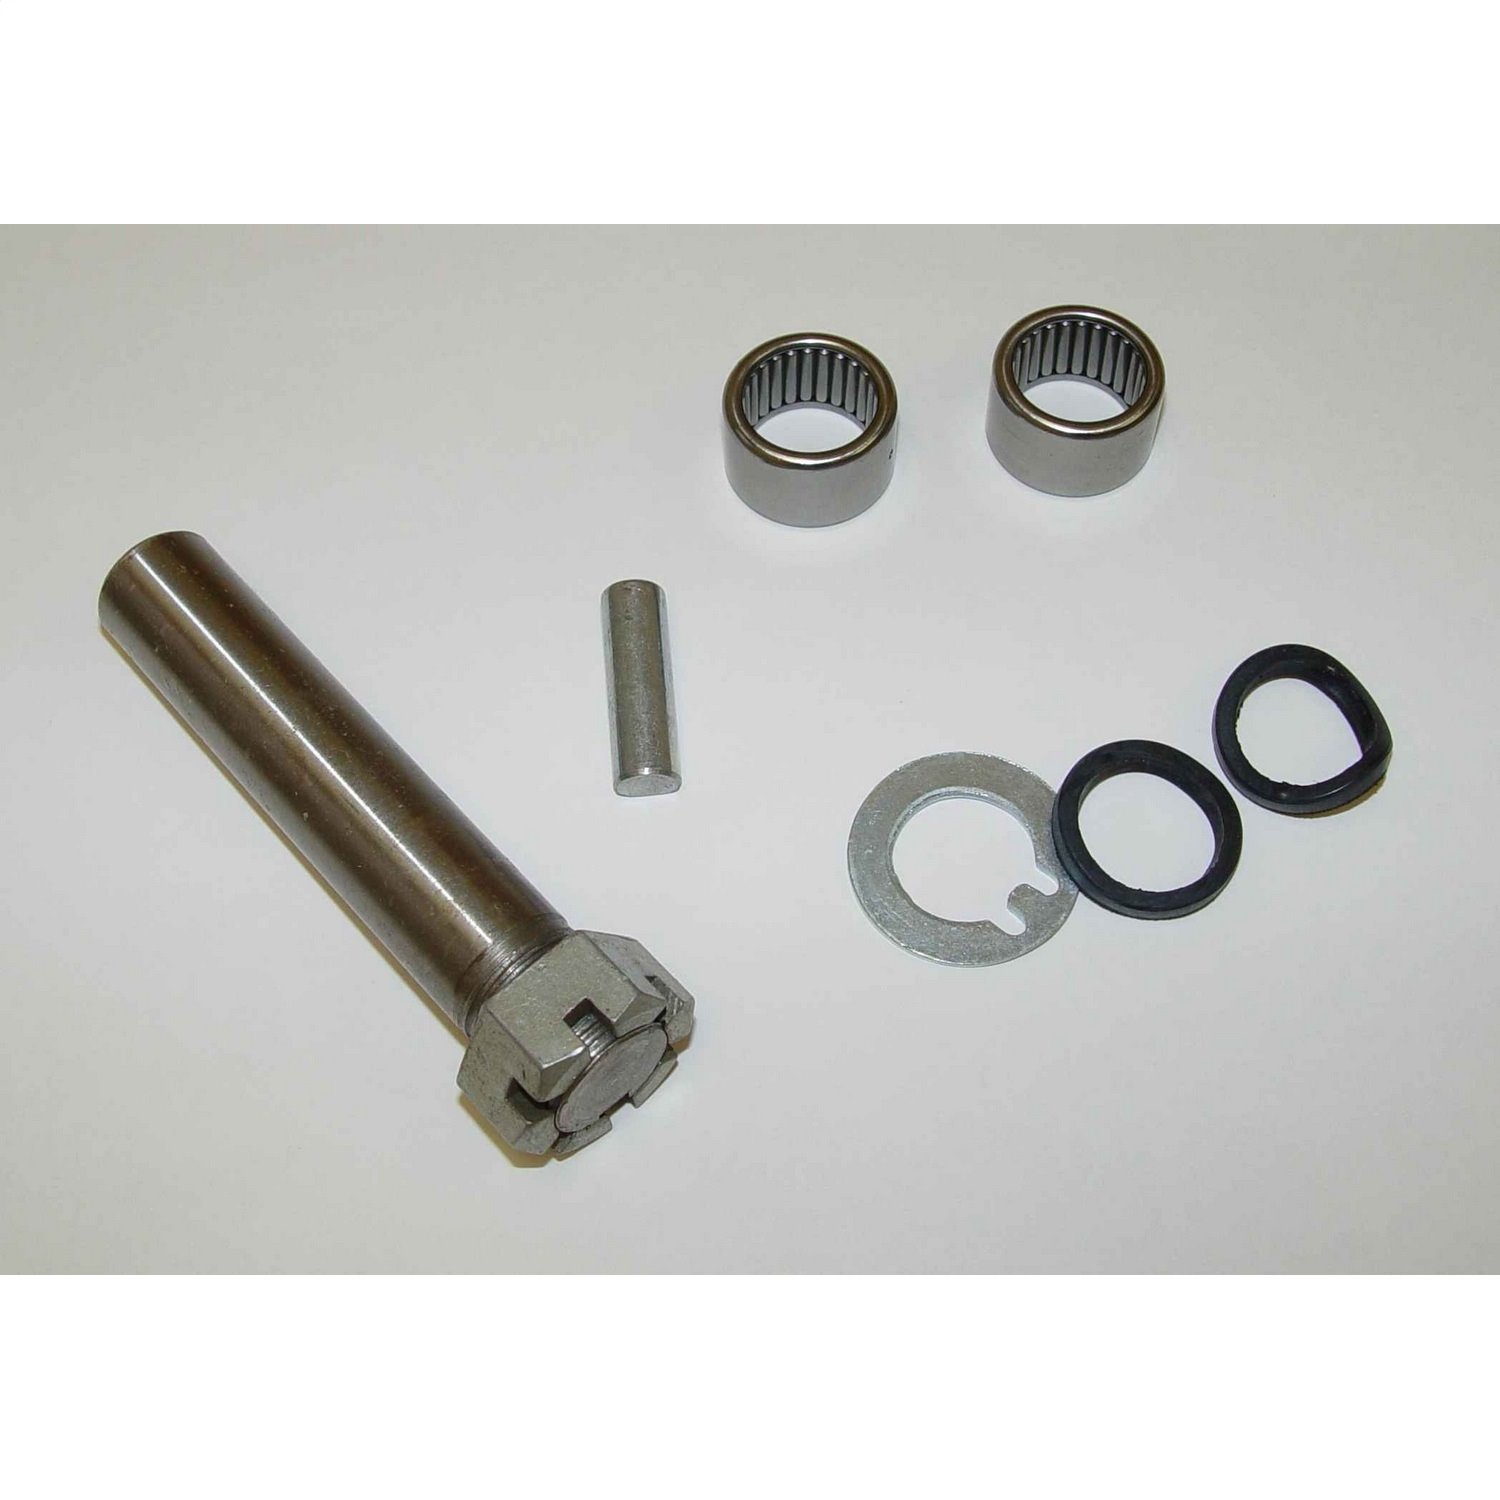 This 3/4 inch steering bellcrank repair kit from Omix-ADA fits 41-45 Willys MBs 41-45 Ford GPWs and